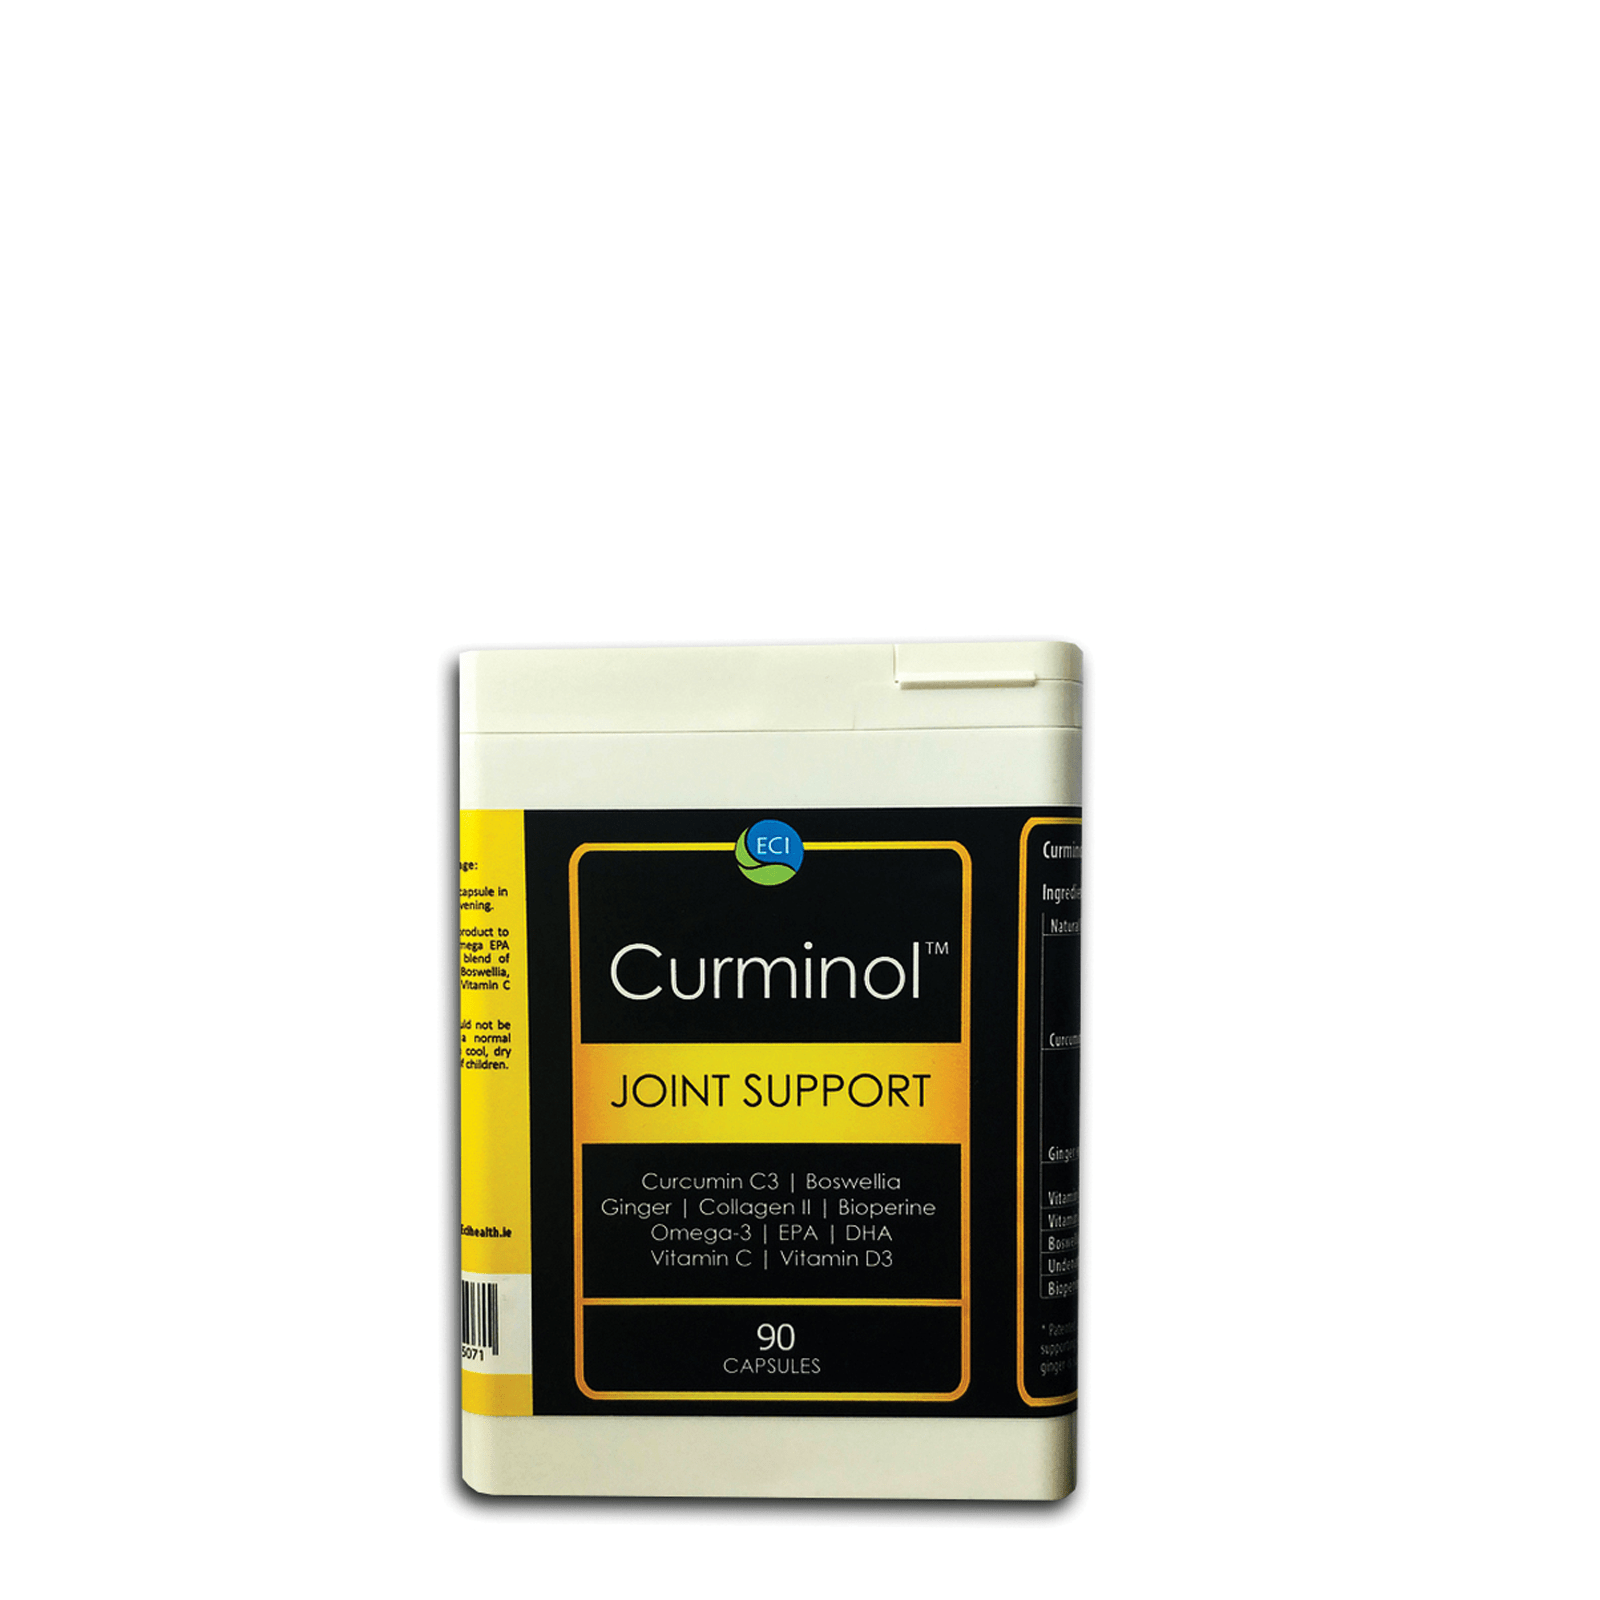 ECI Natural Health Curminol Joint Support 90's